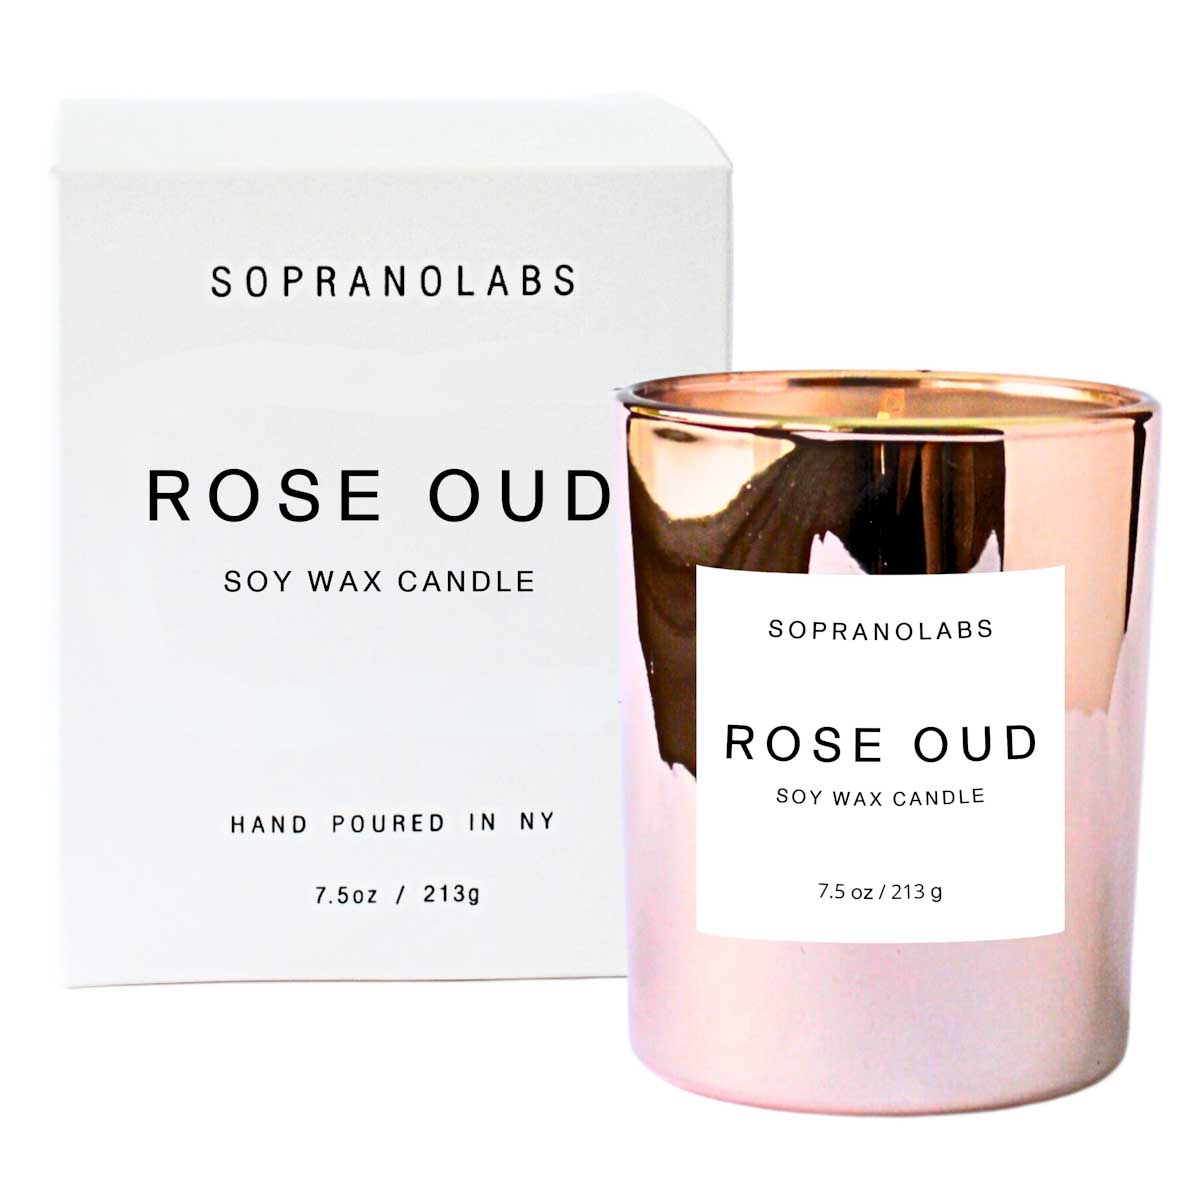 Rose Oud Soy Wax Candle by Sopranolabs